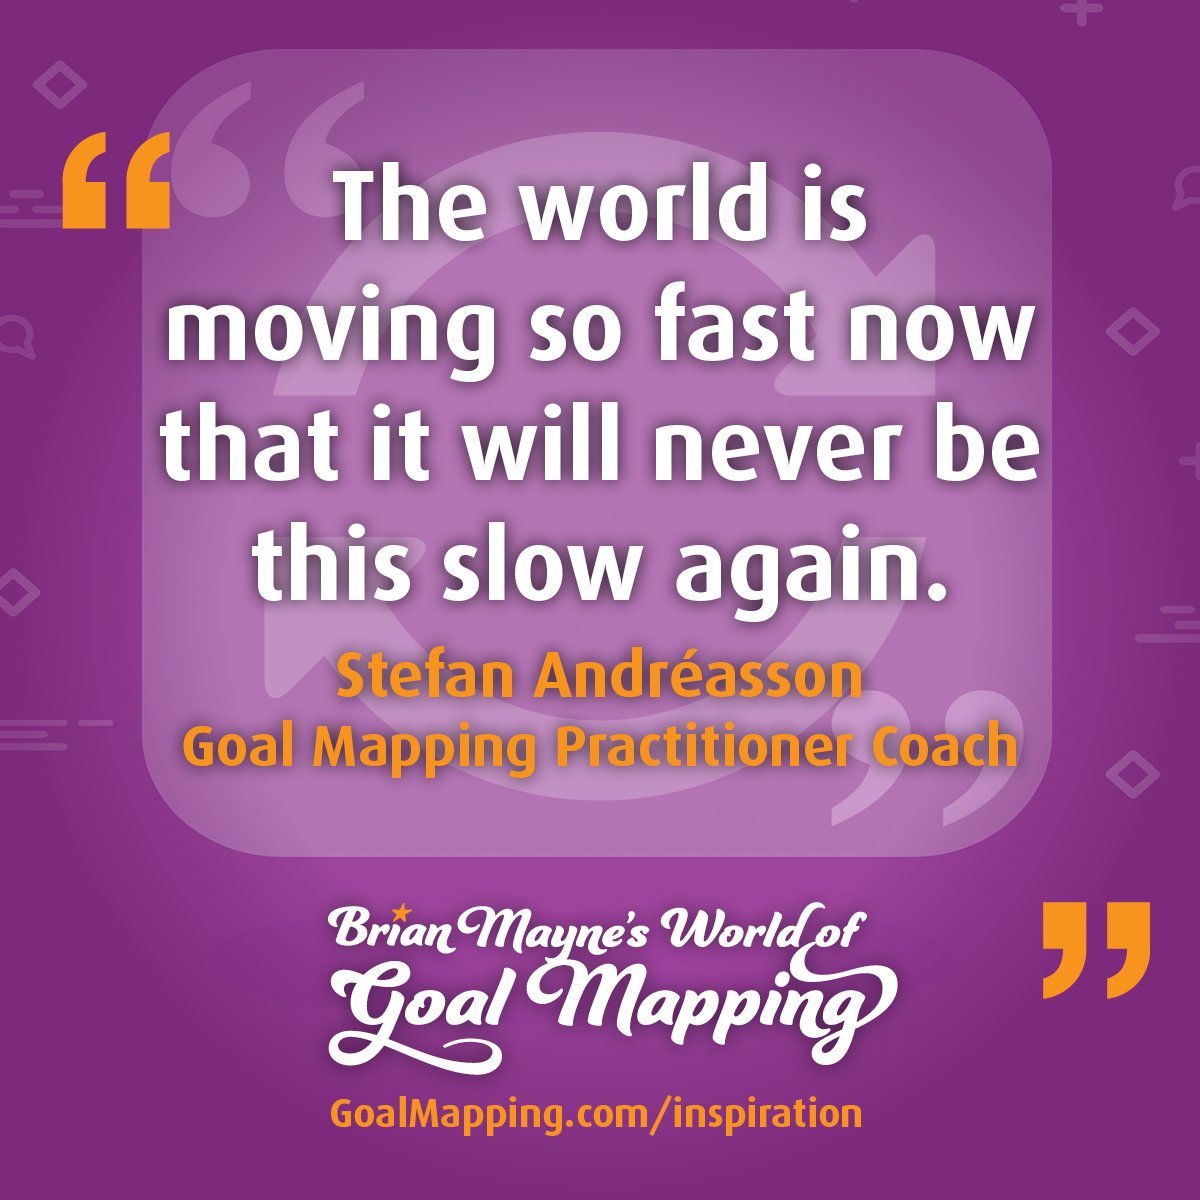 "The world is moving so fast now that it will never be this slow again." Stefan Andréasson Goal Mapping Practitioner Coach